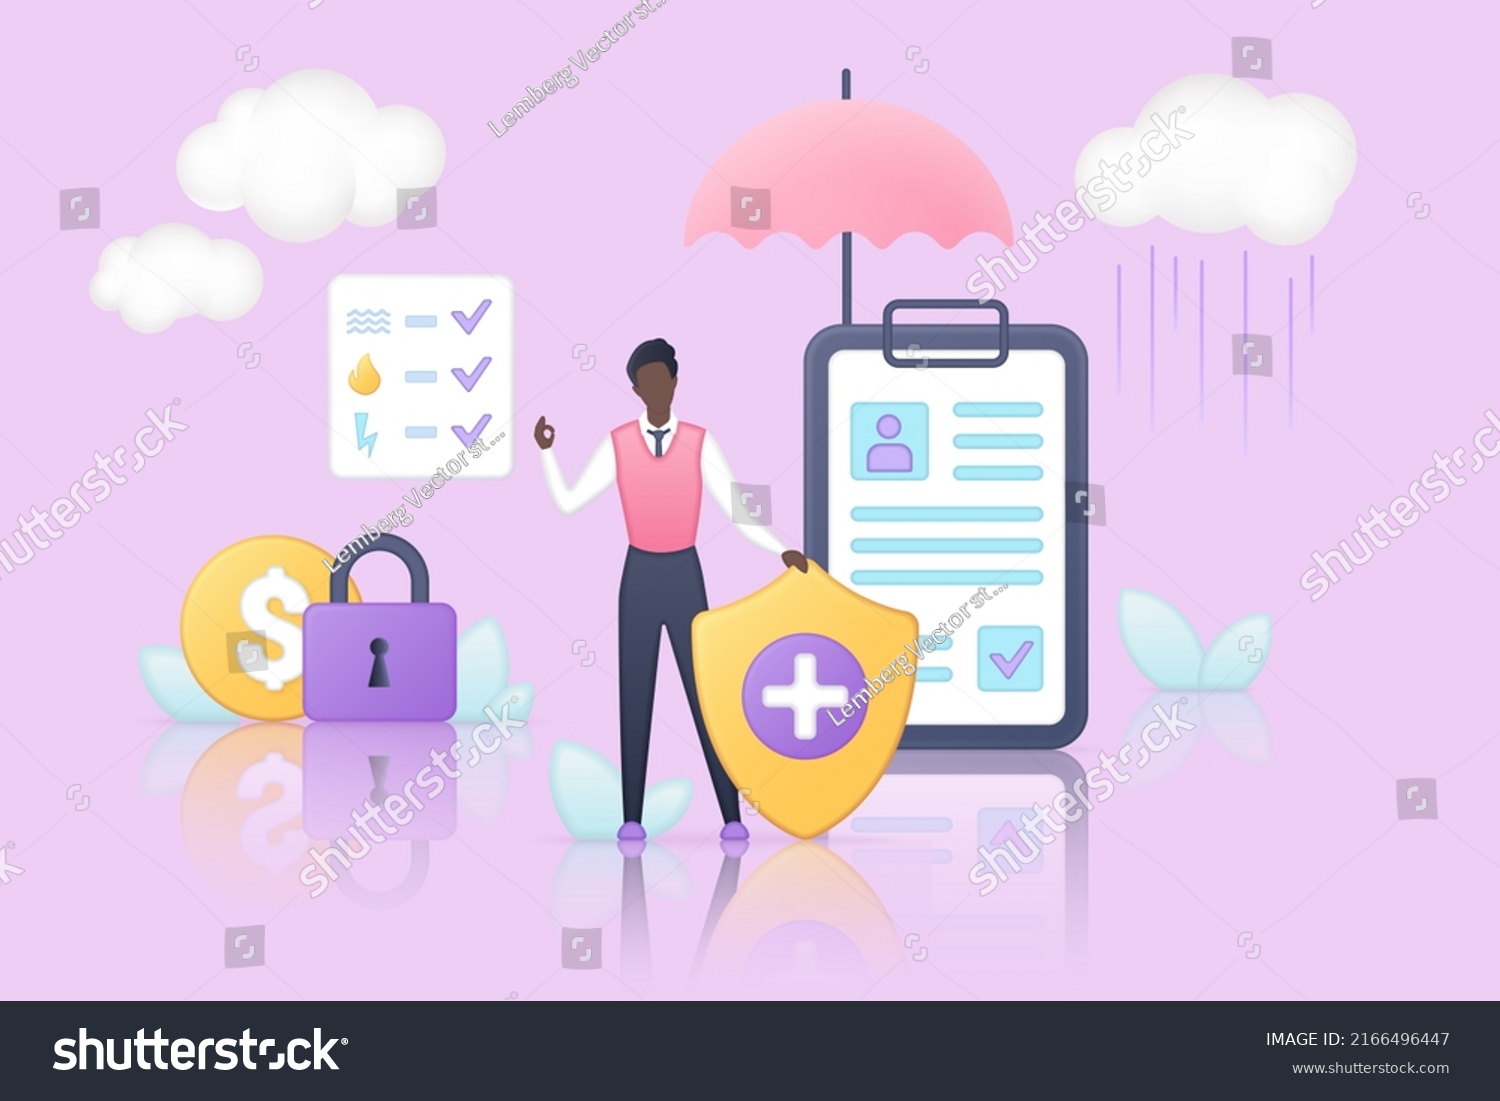 SVG of Umbrella, claim document and tiny employee holding medical shield to protect health life from accidents infographic 3d vector illustration. Warranty, insurance medicine and protection service concept svg